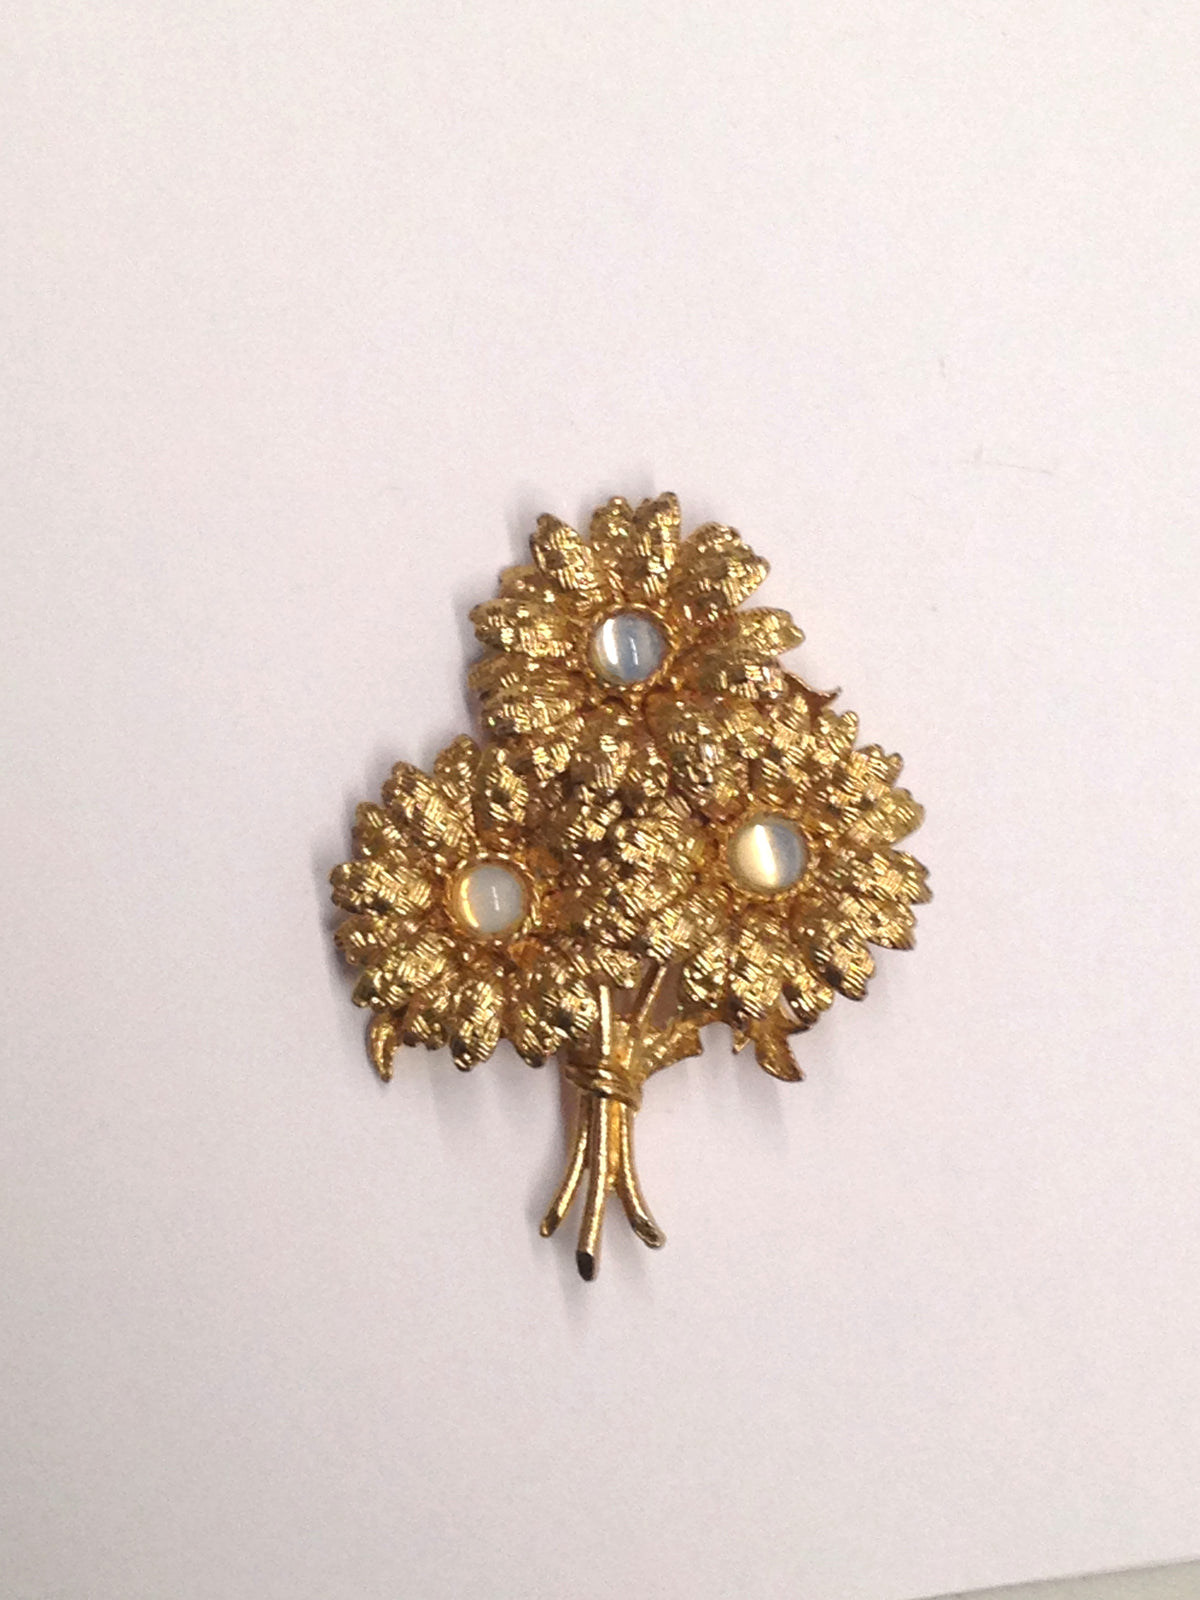 www.hersandhistreasures.com/products/Gold-Toned-Flower-Bouquet-Brooch-Pin